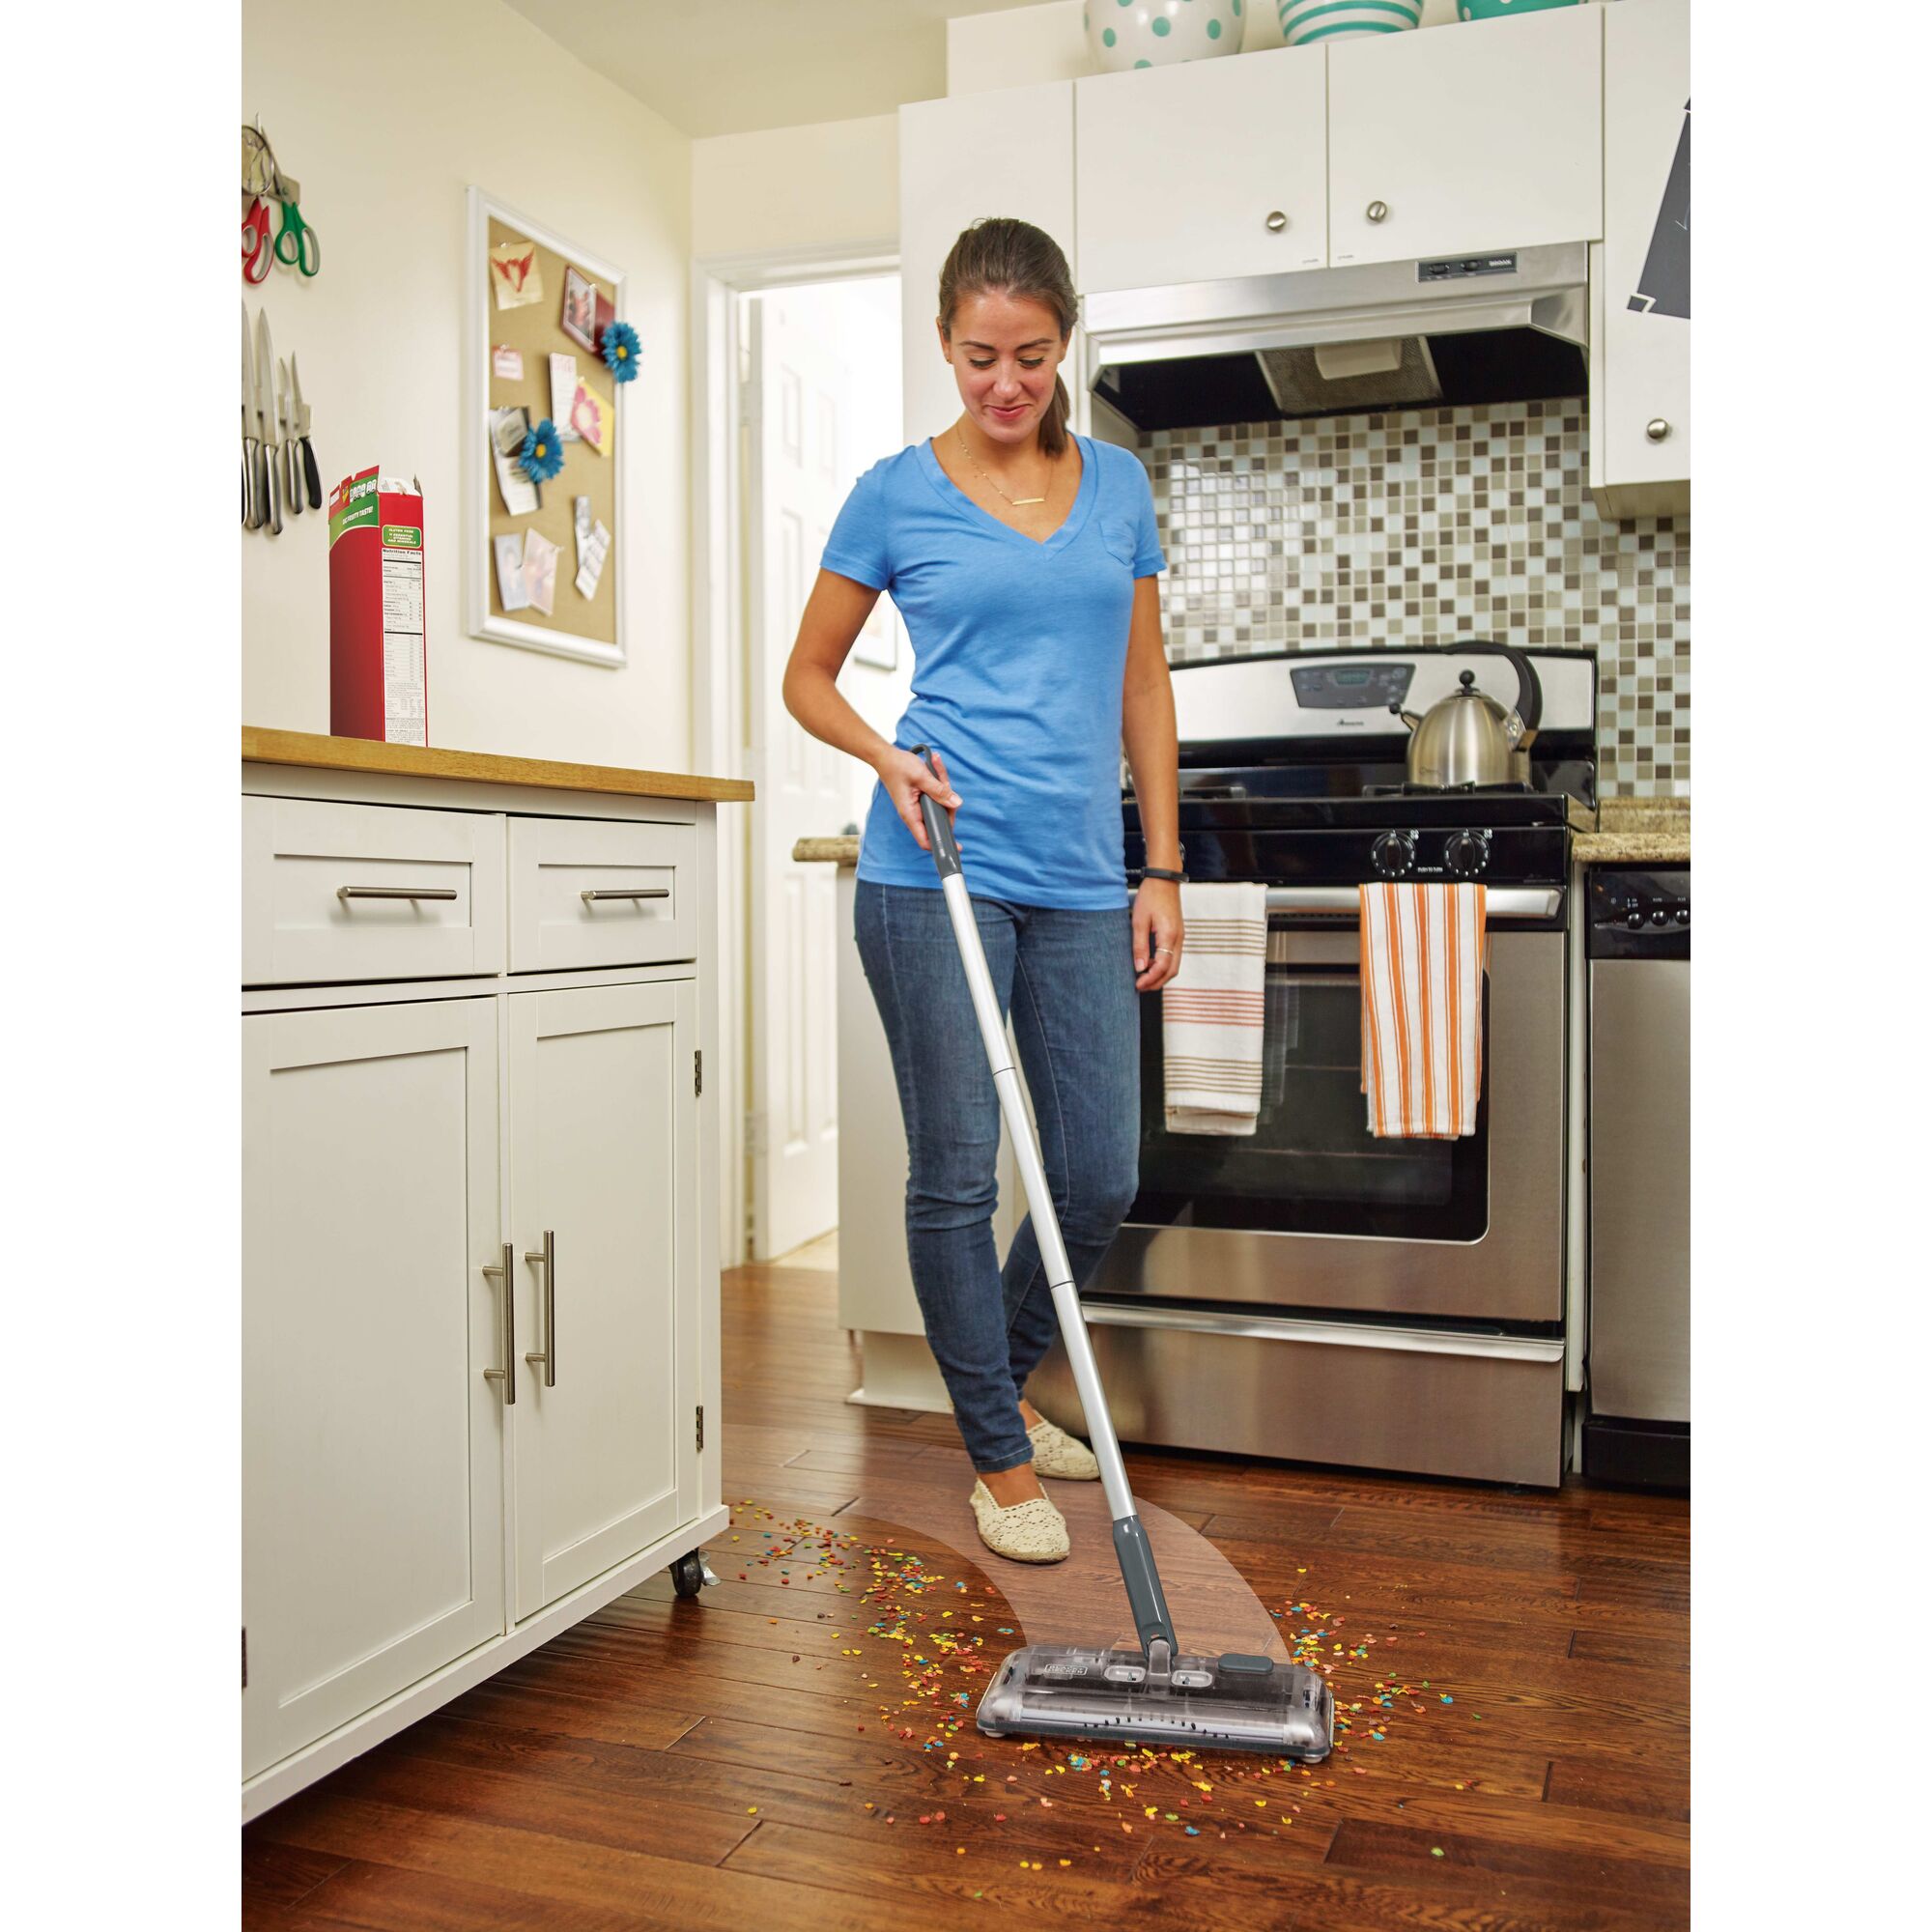 100 Minute Powered Floor Sweeper being used for cleaning mess on floor by person.